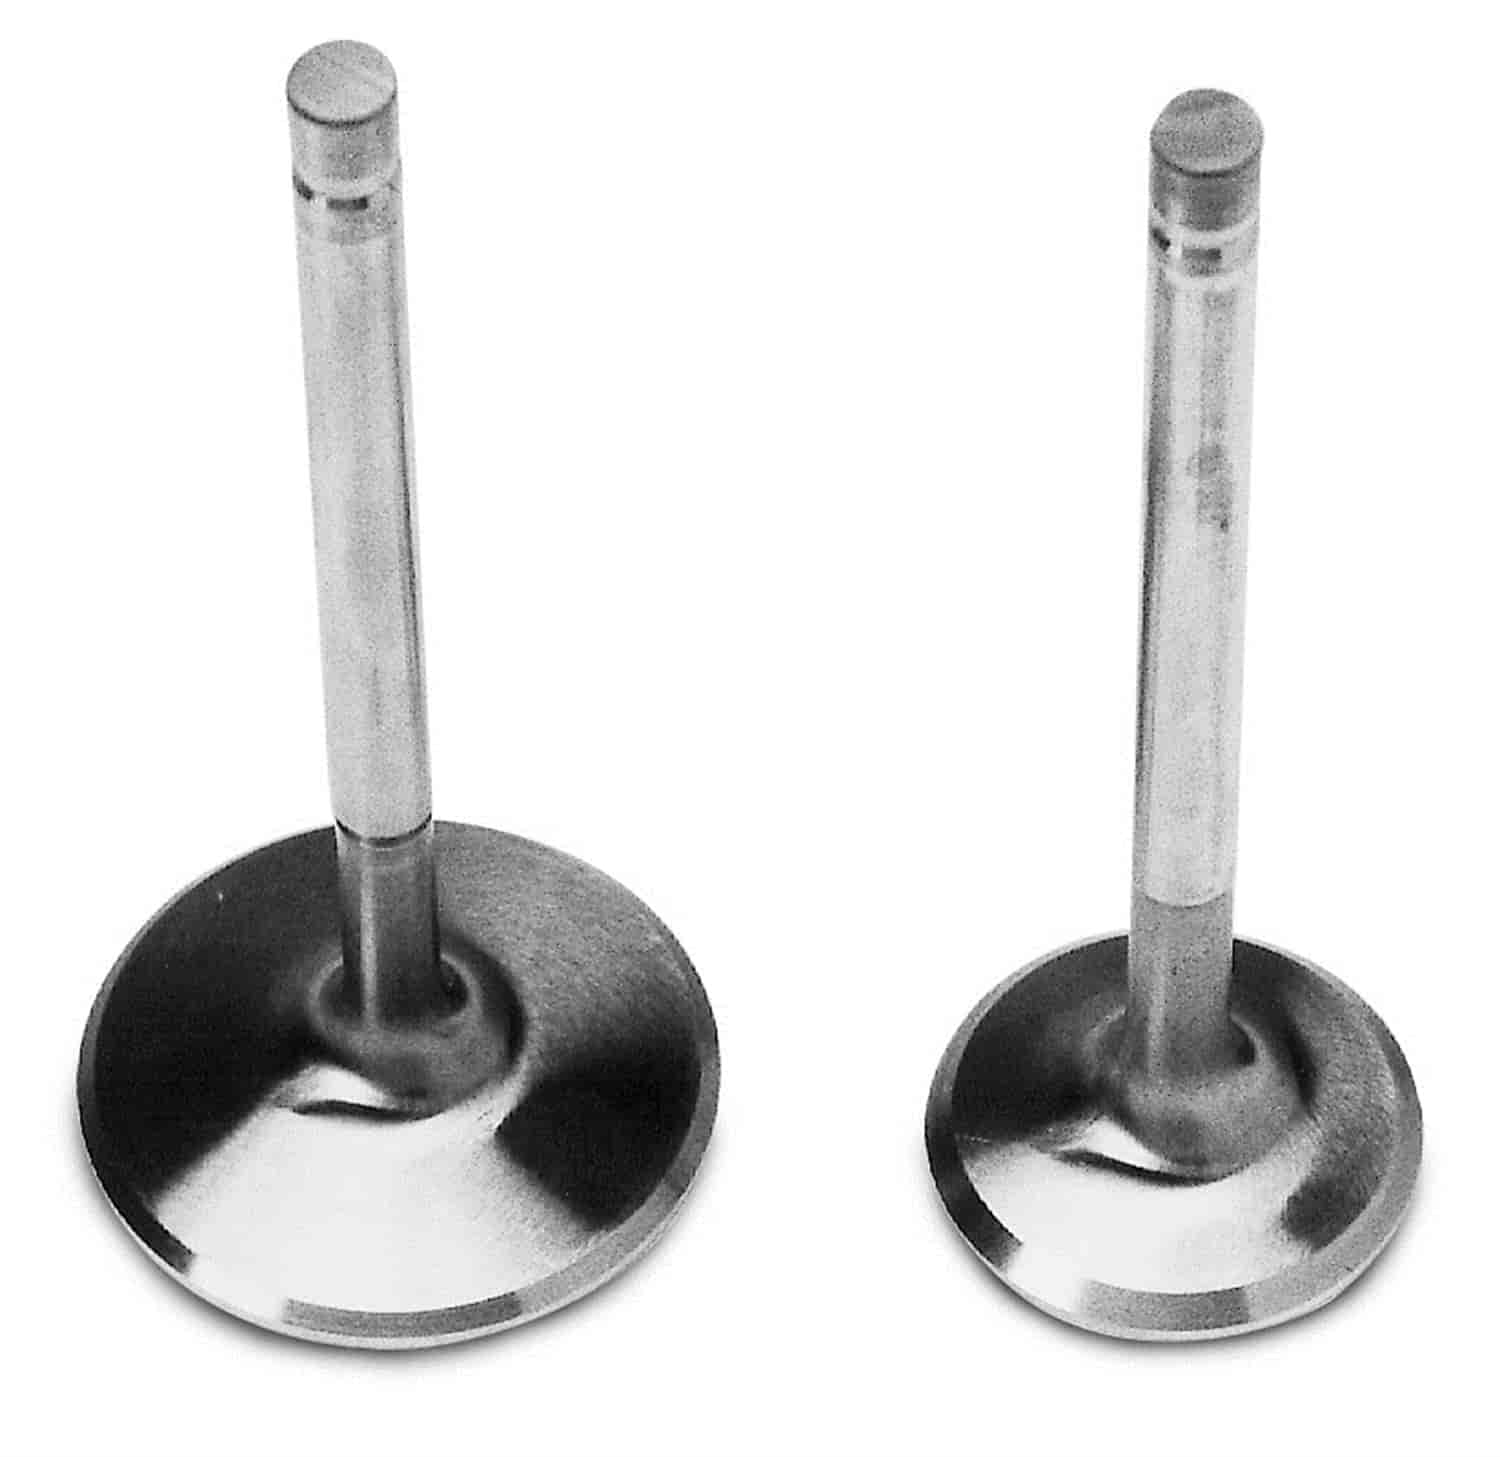 Single Intake Valve 2.19" for Big Block Chevy Performer RPM Heads #350-60459, 350-60479, 350-60499, & 350-60559